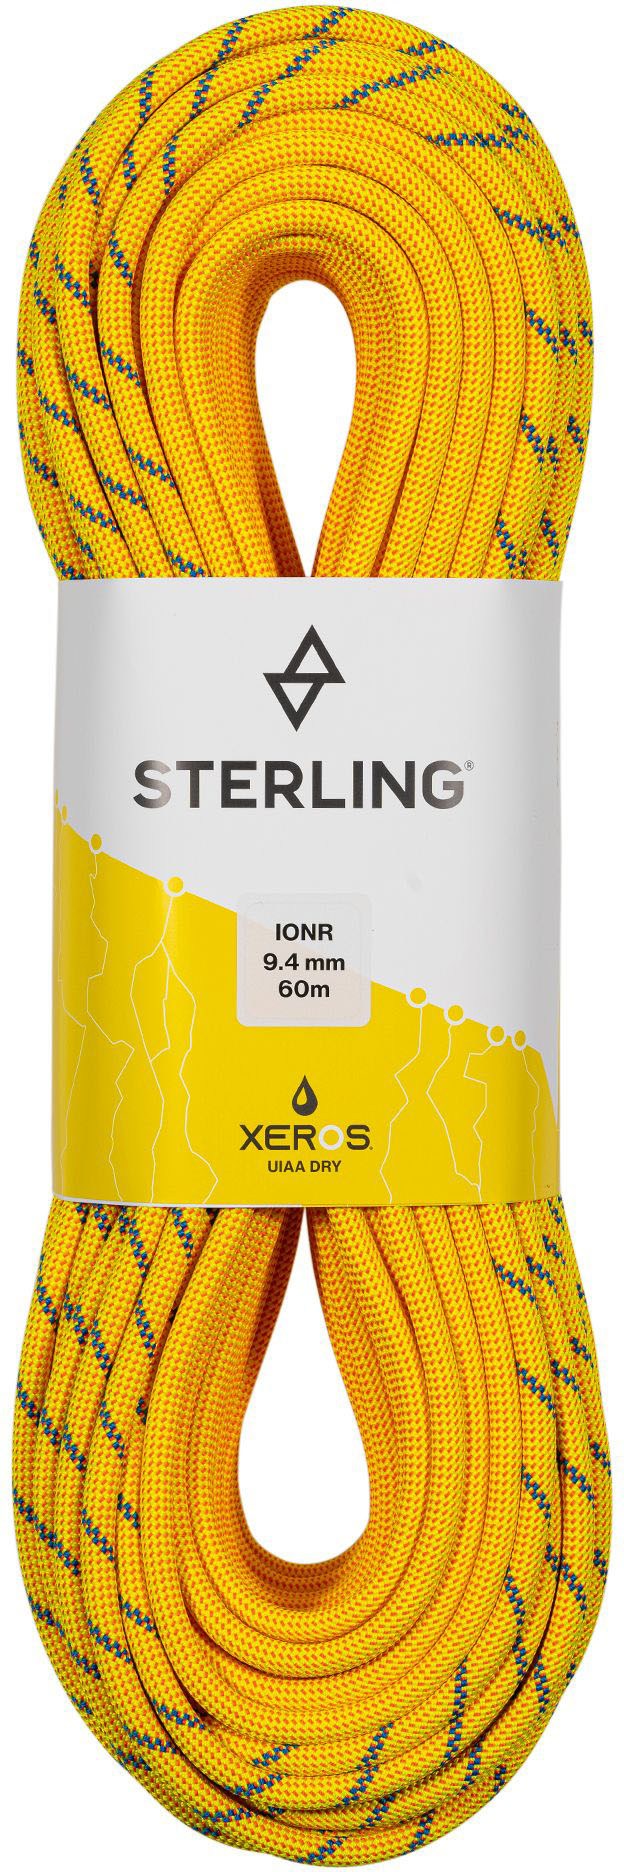 Sterling Ion R XEROS Dry (climbing ropes)